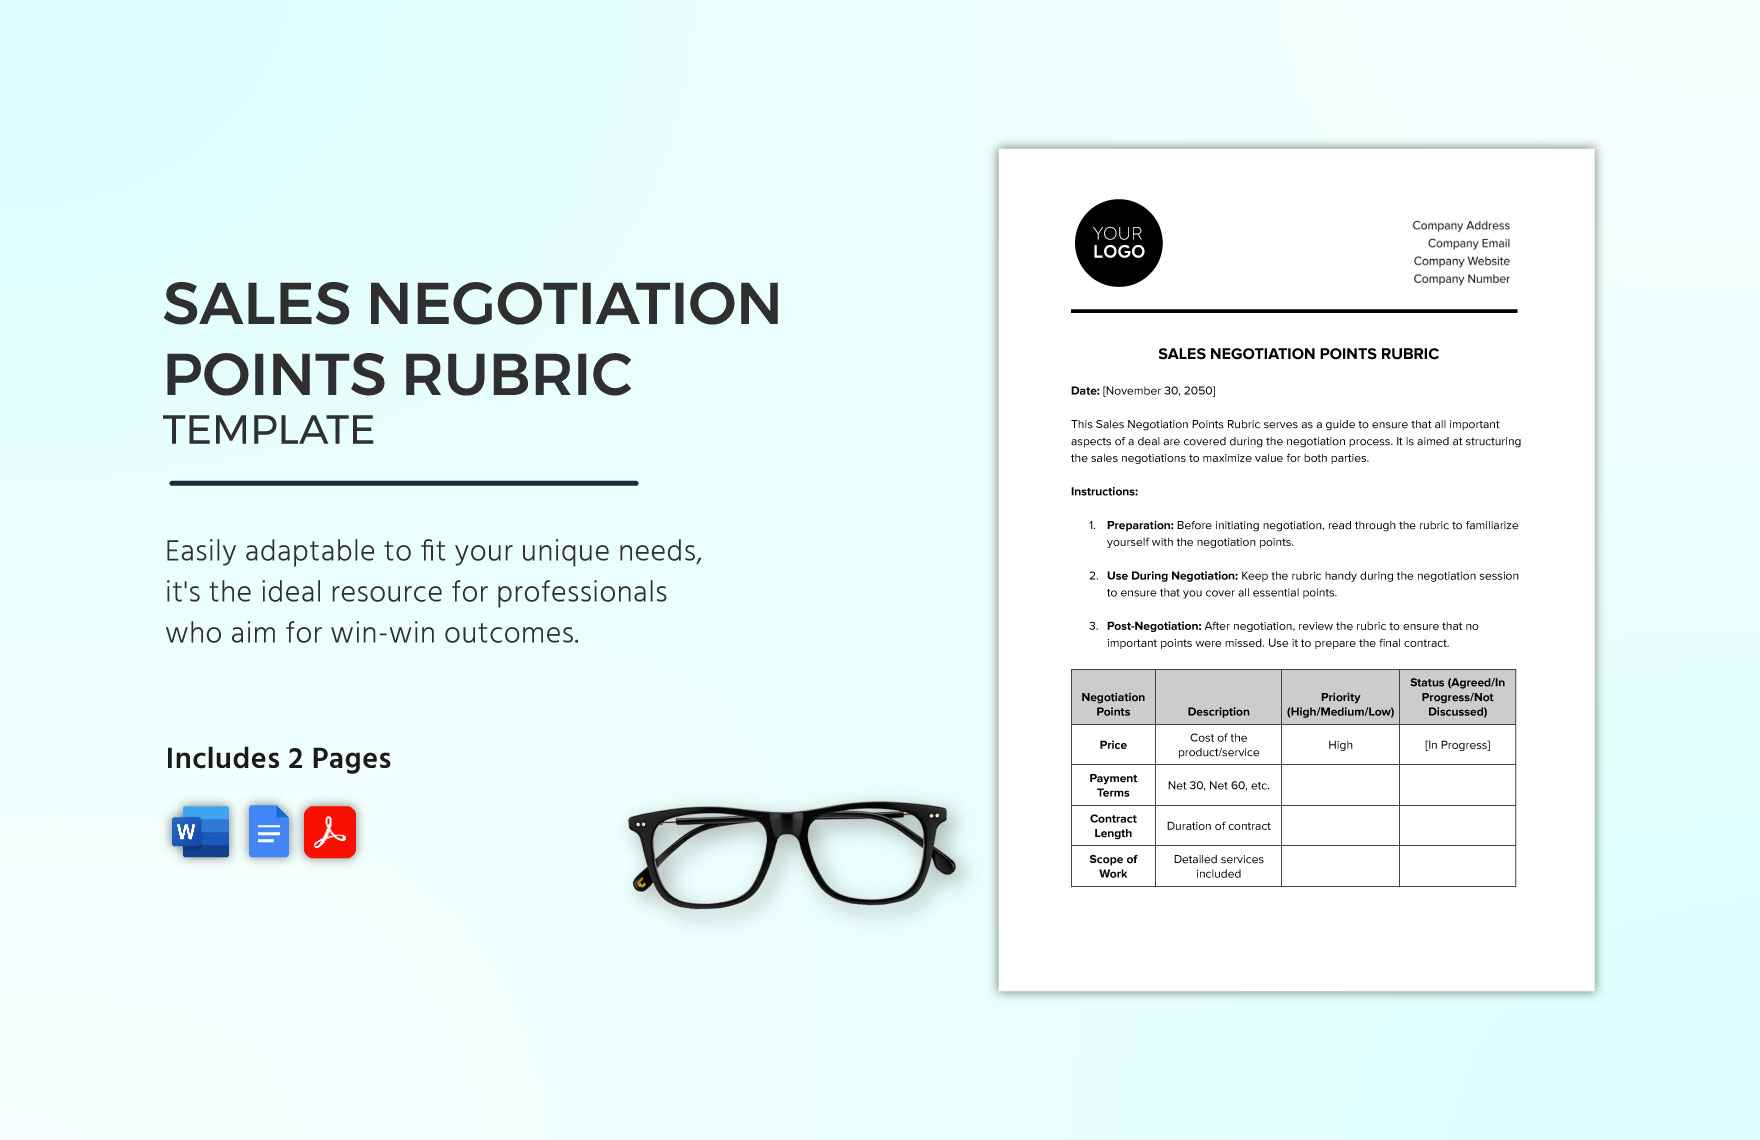 Sales Negotiation Points Rubric Template in Word, Google Docs, PDF